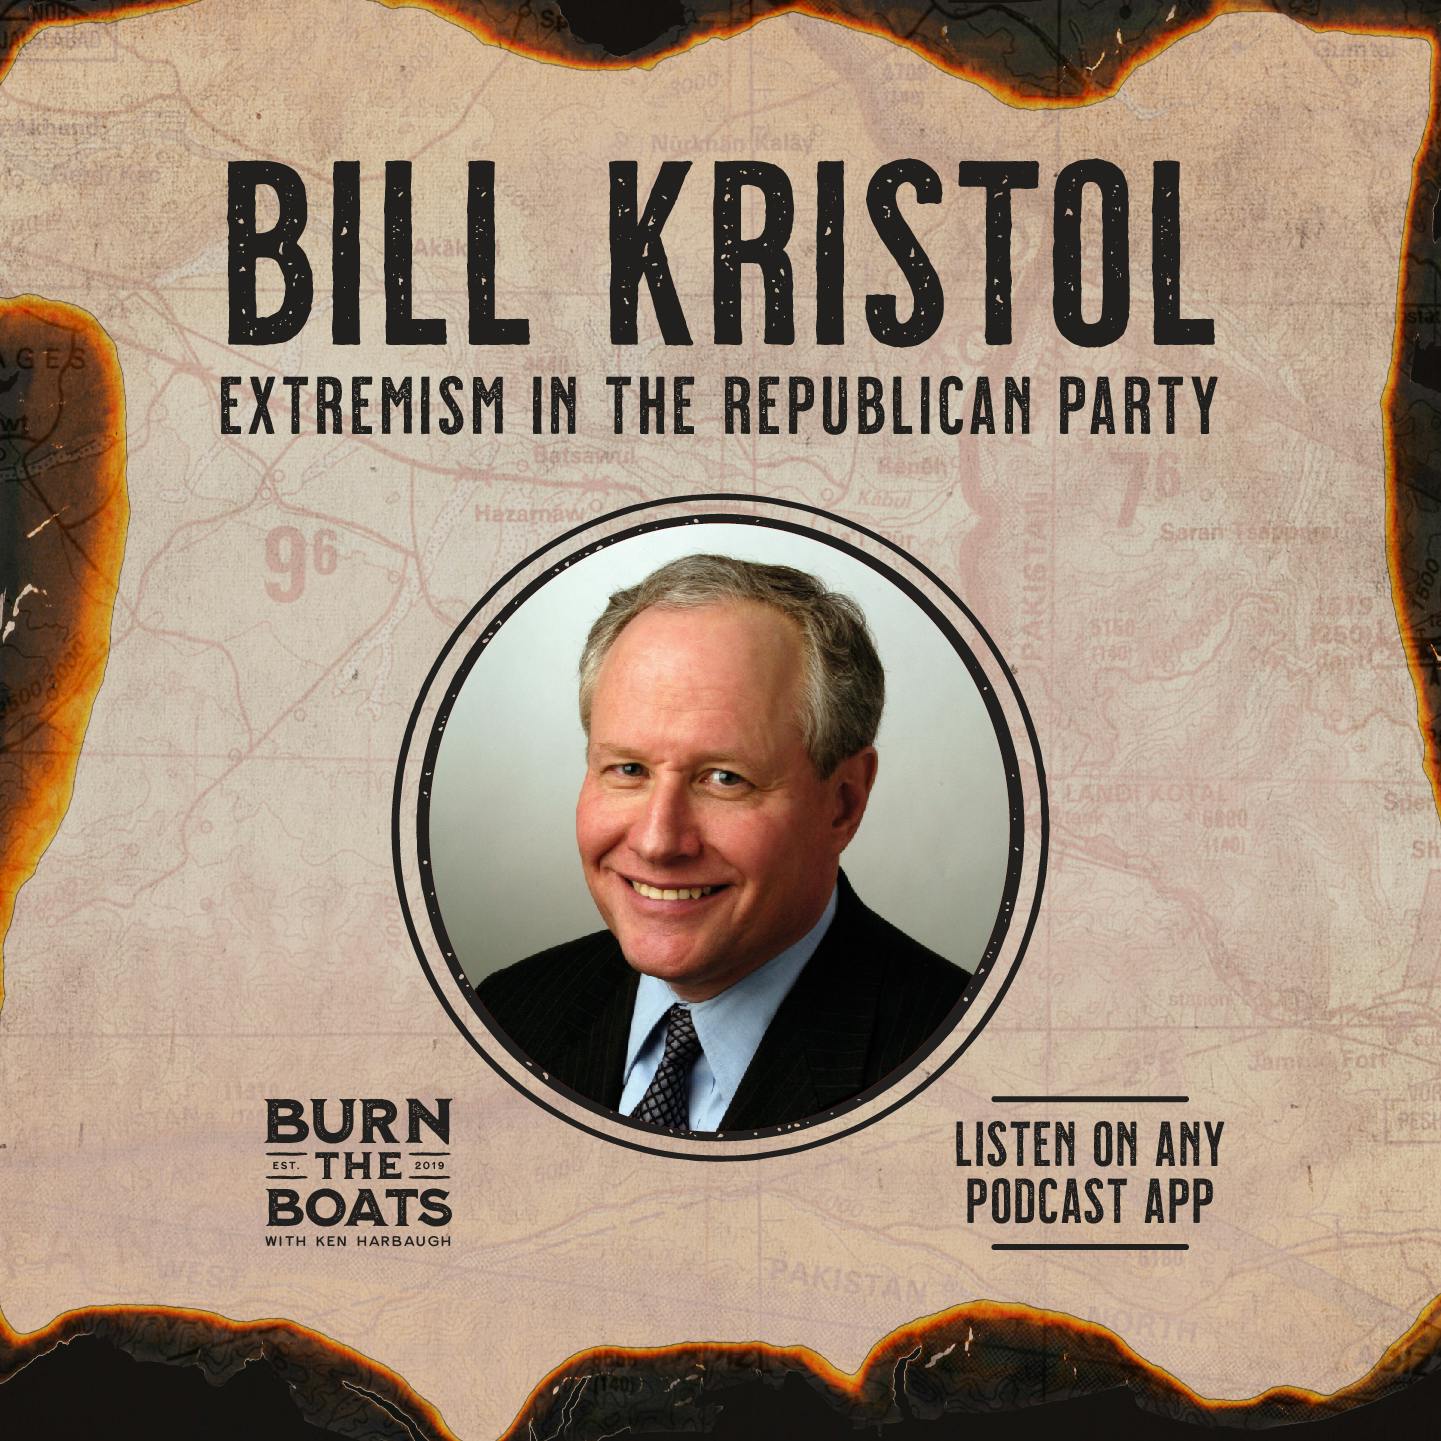 Bill Kristol: Extremism in the Republican Party